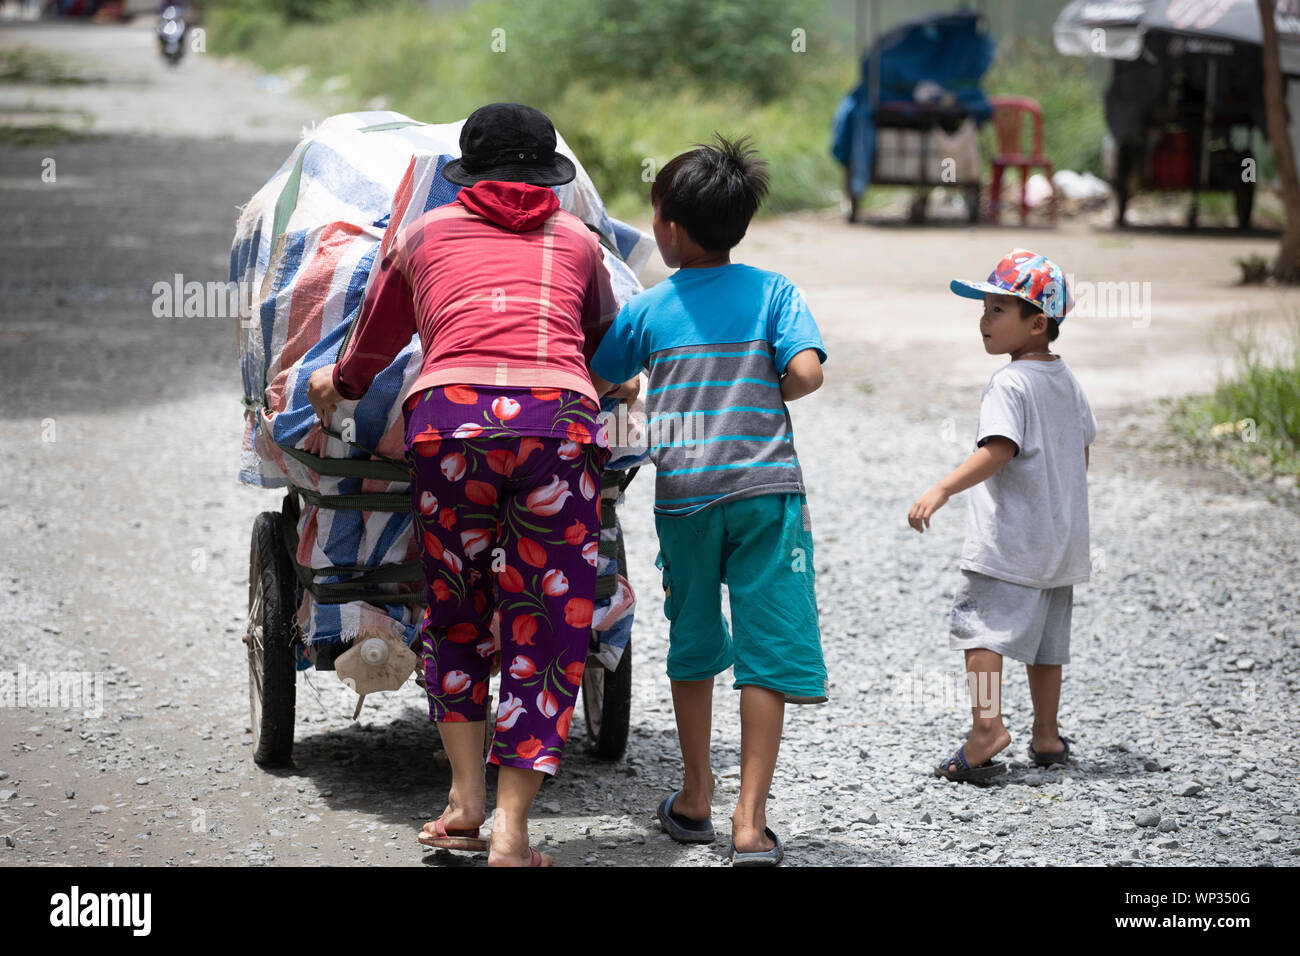 A mother and her two young sons push their packed up street food cart along a dirt road in district 7, Ho Chi Minh City after a busy day's cooking Stock Photo